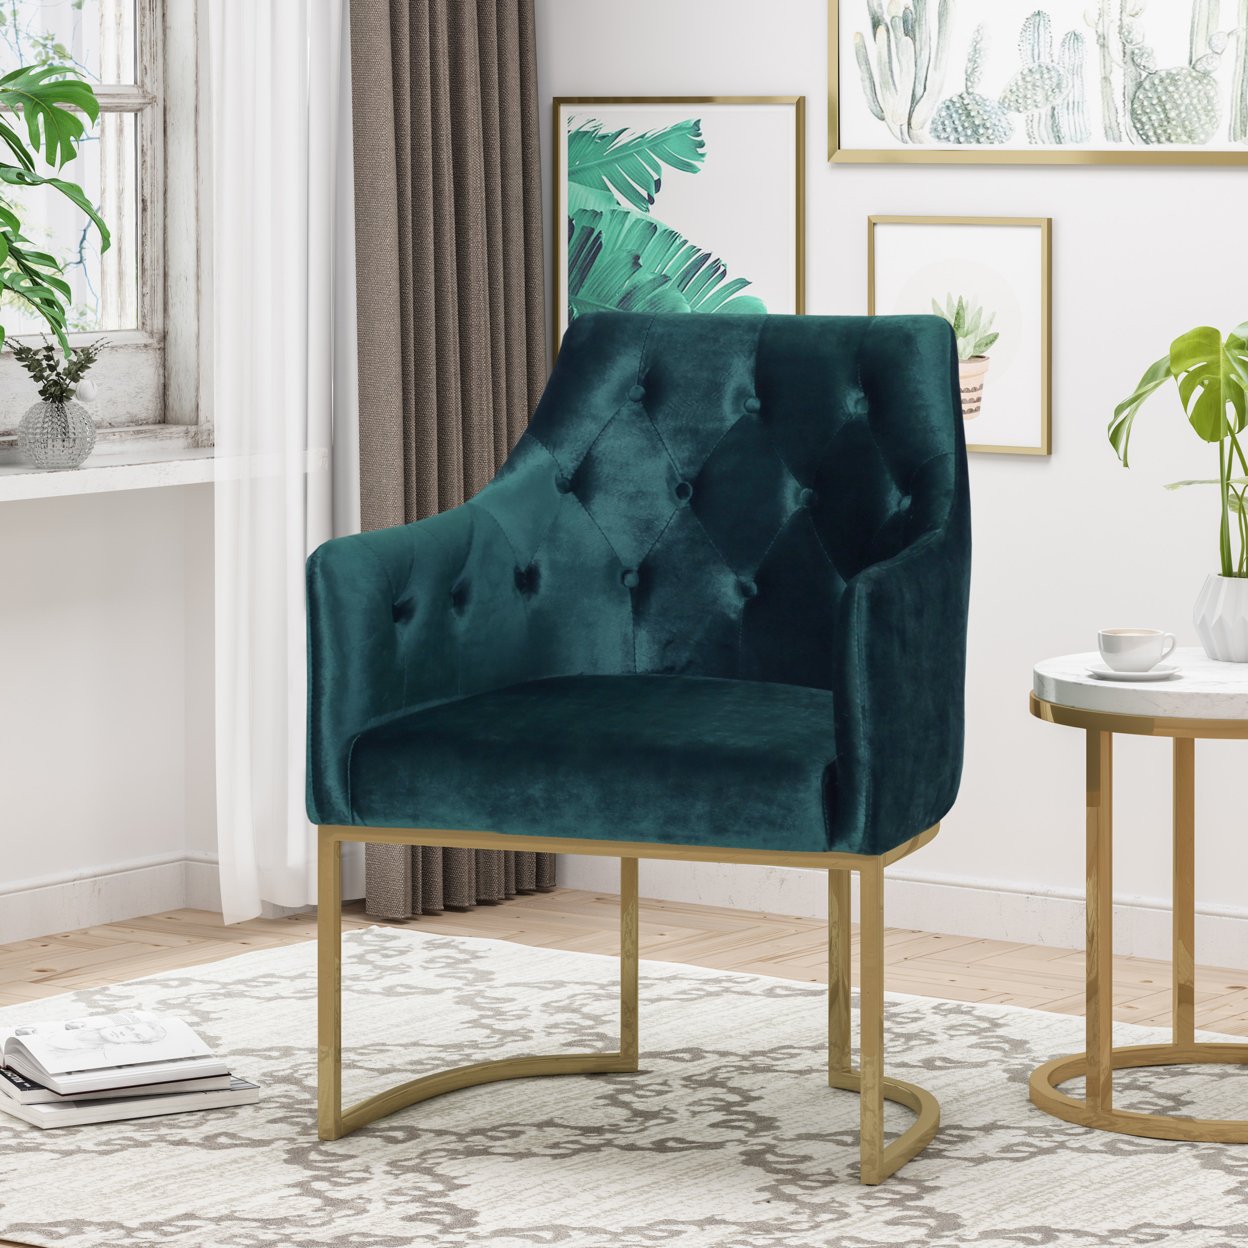 Fern Modern Tufted Glam Accent Chair With Velvet Cushions And U-Shaped Base - Emerald + Gold